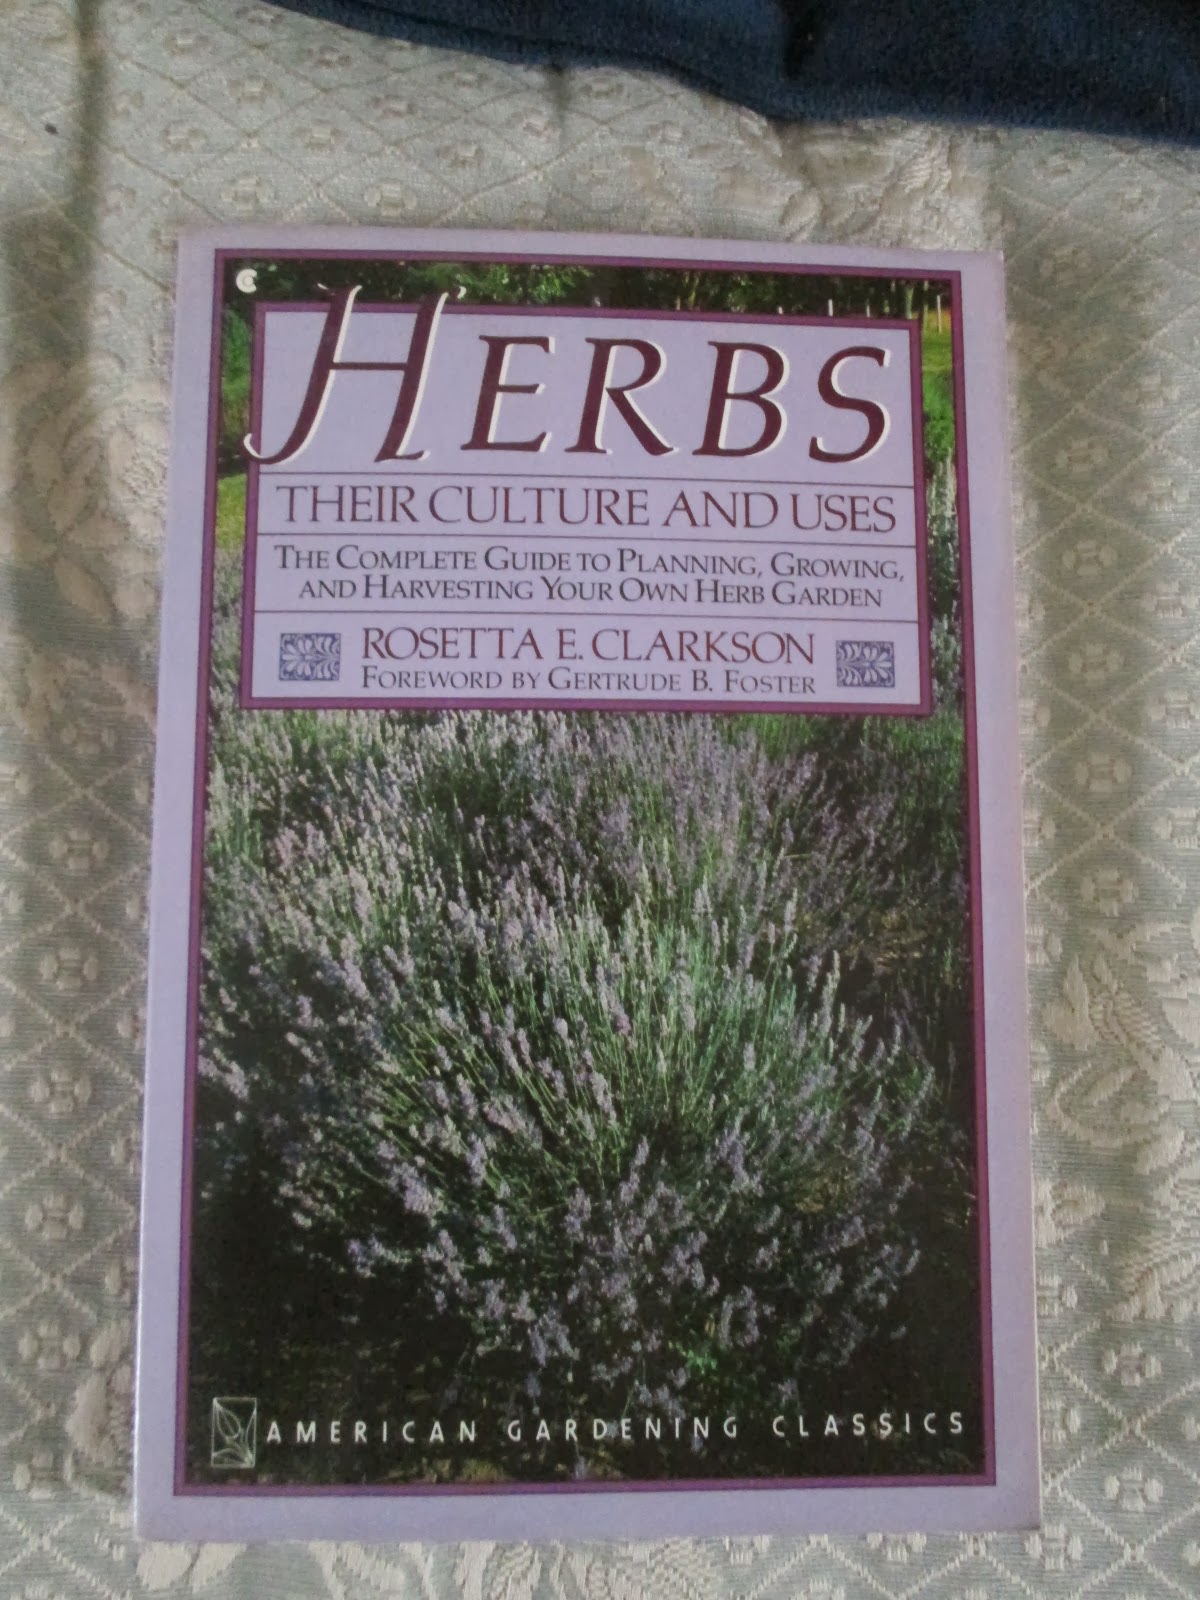 Lemon Verbena Lady S Herb Garden Book Review Herbs Their Culture And Uses By Rosetta E Clarkson